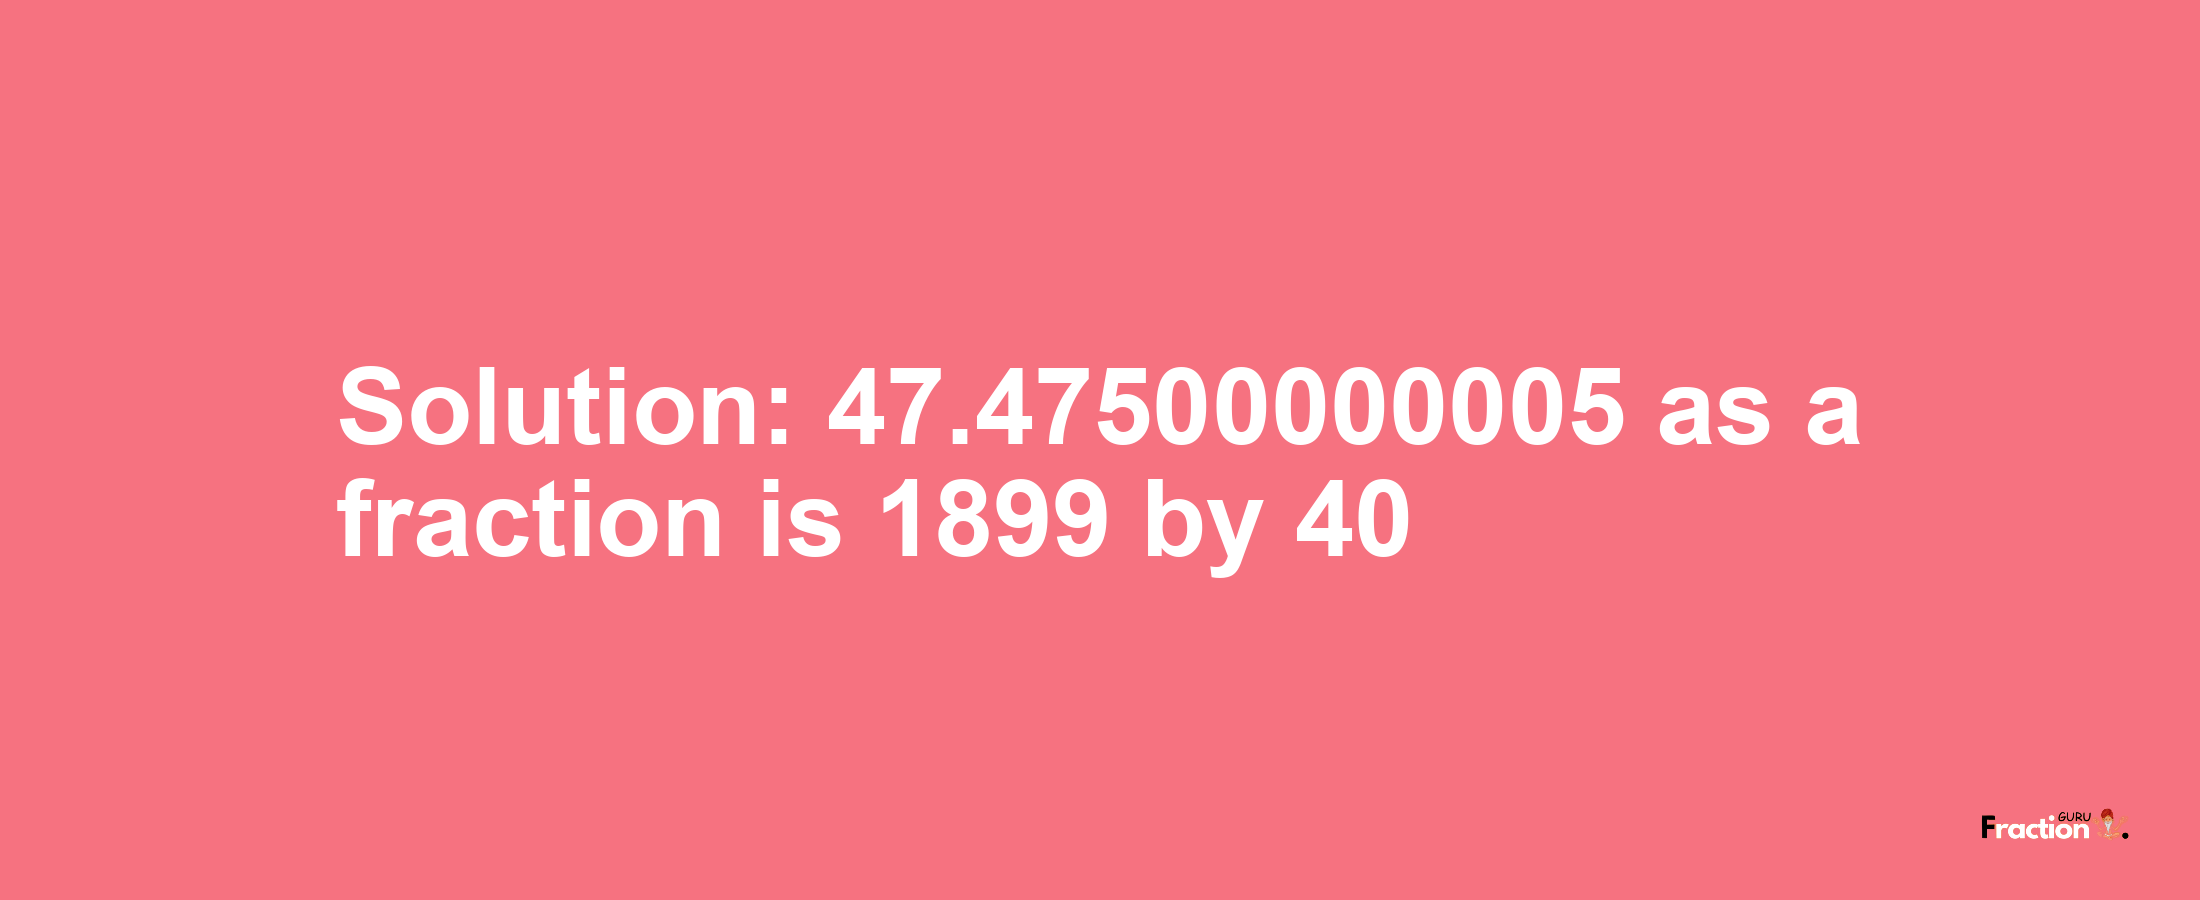 Solution:47.47500000005 as a fraction is 1899/40